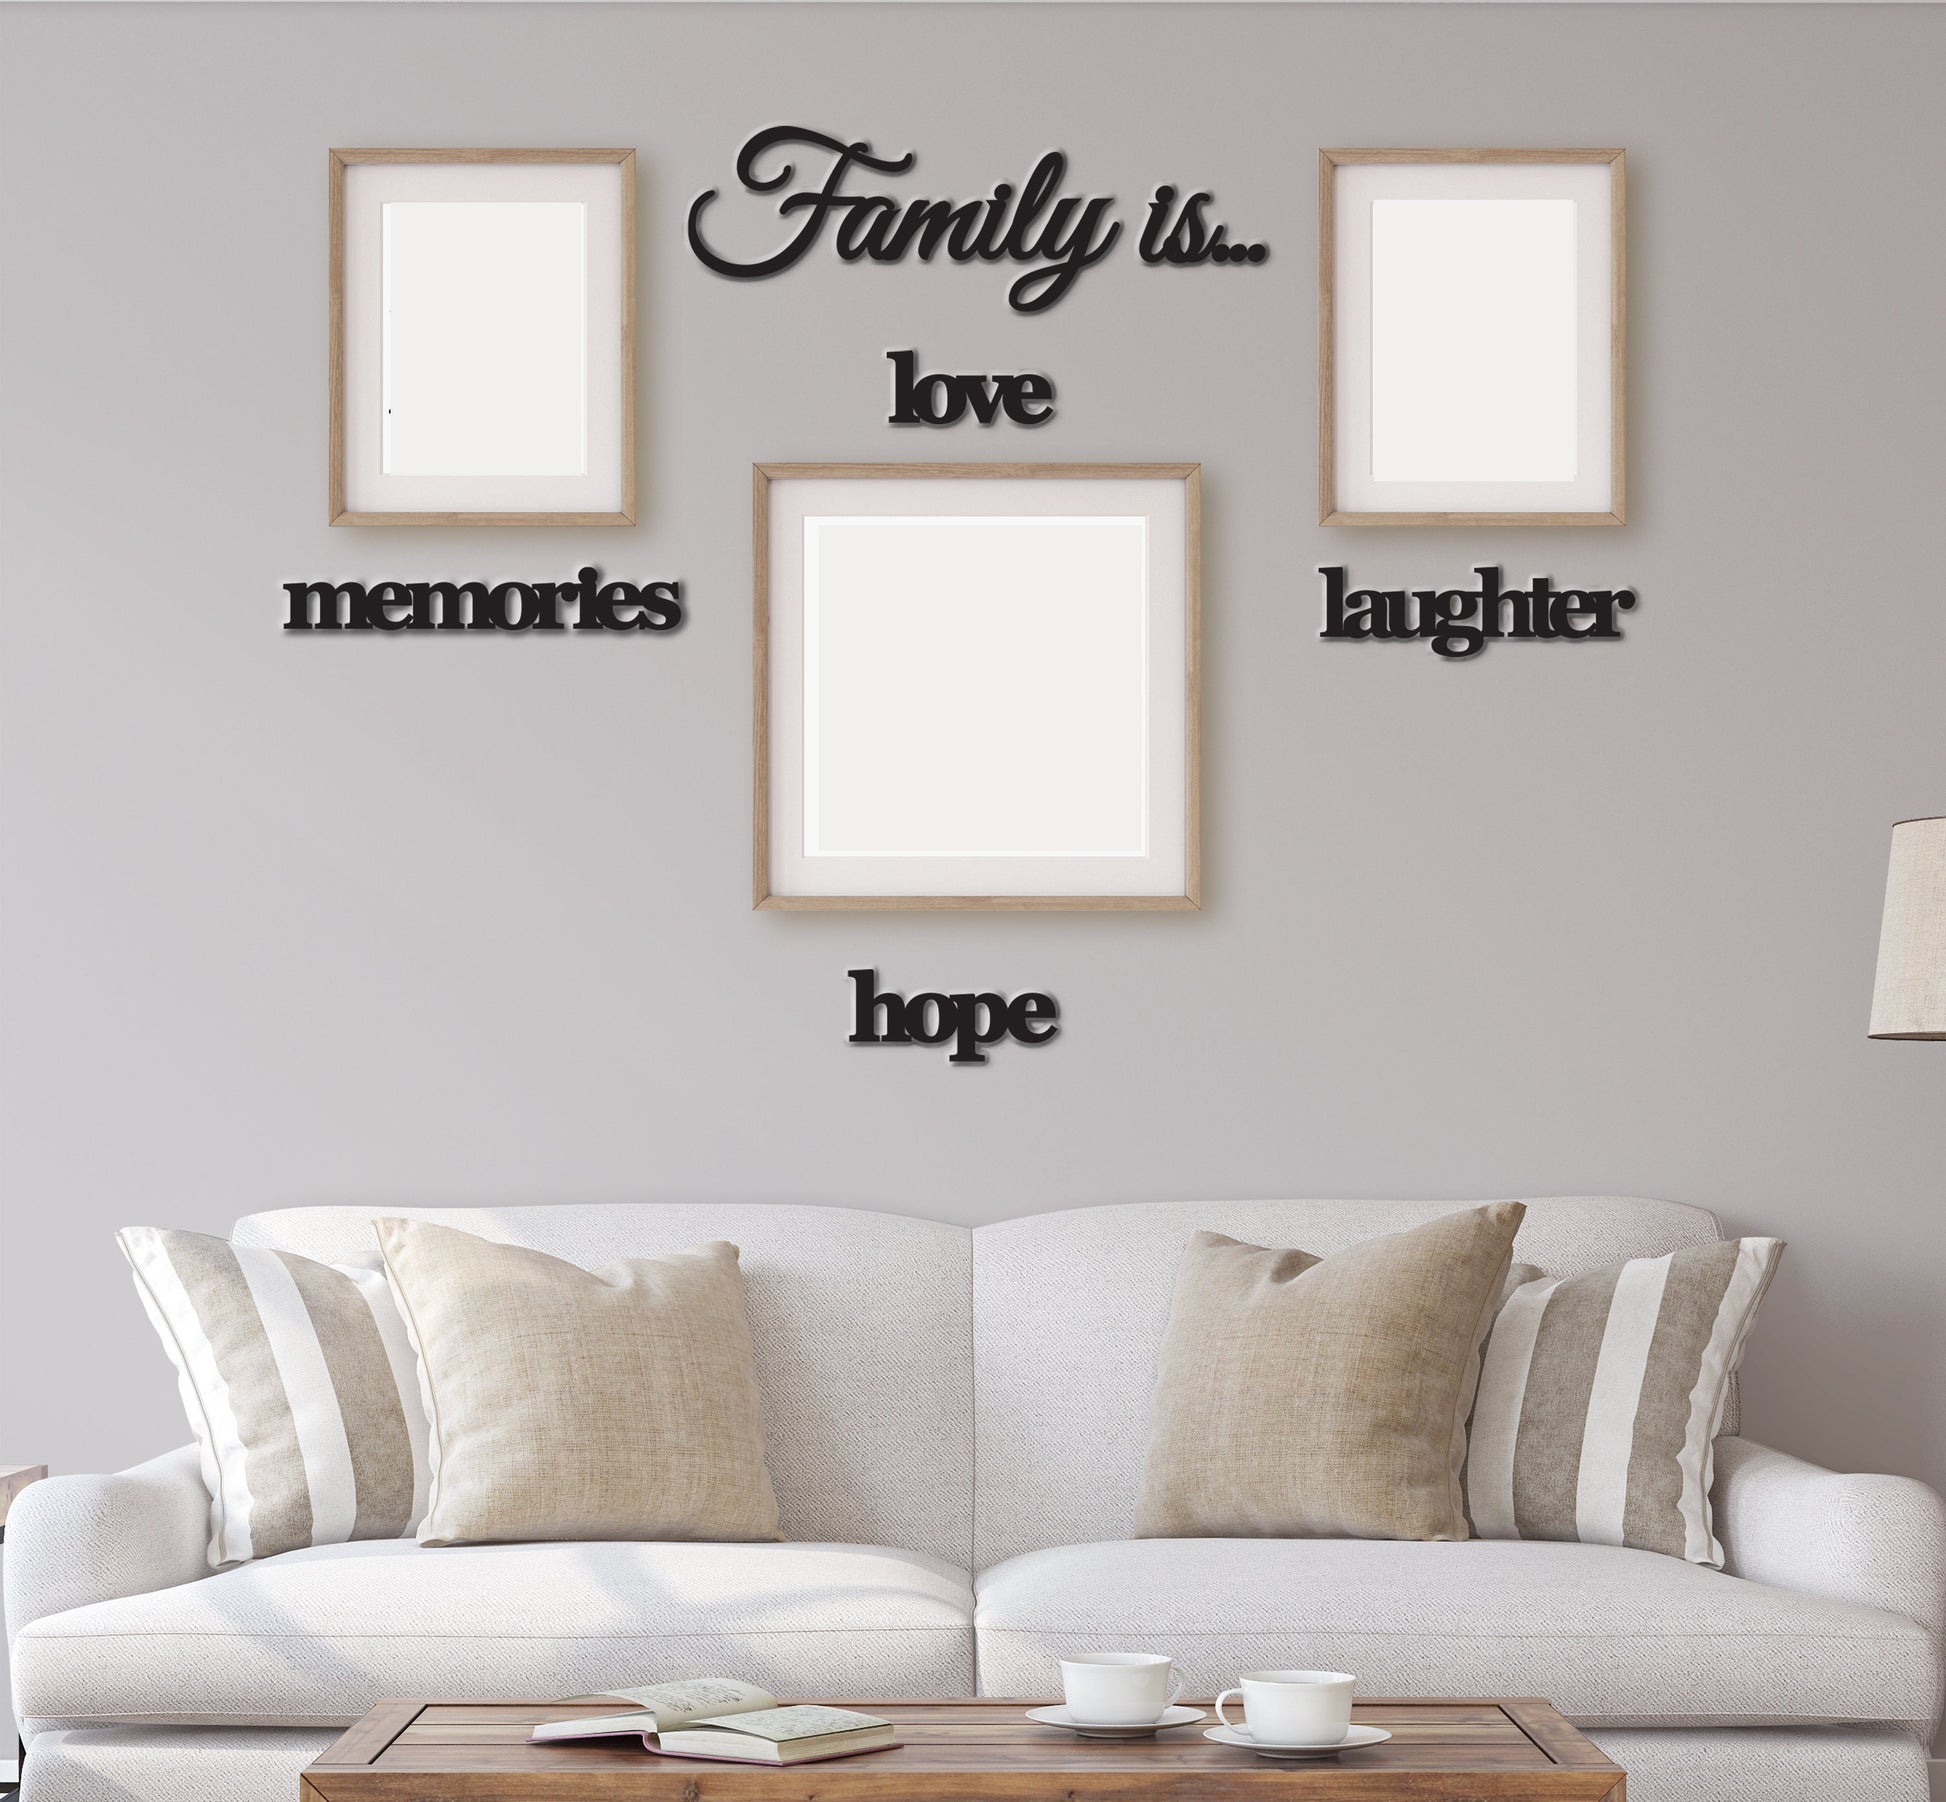 Wood words for gallery wall, Family is memories laughter love hope, word cutouts for picture collage wall, DIY project Home Decor Wall Art